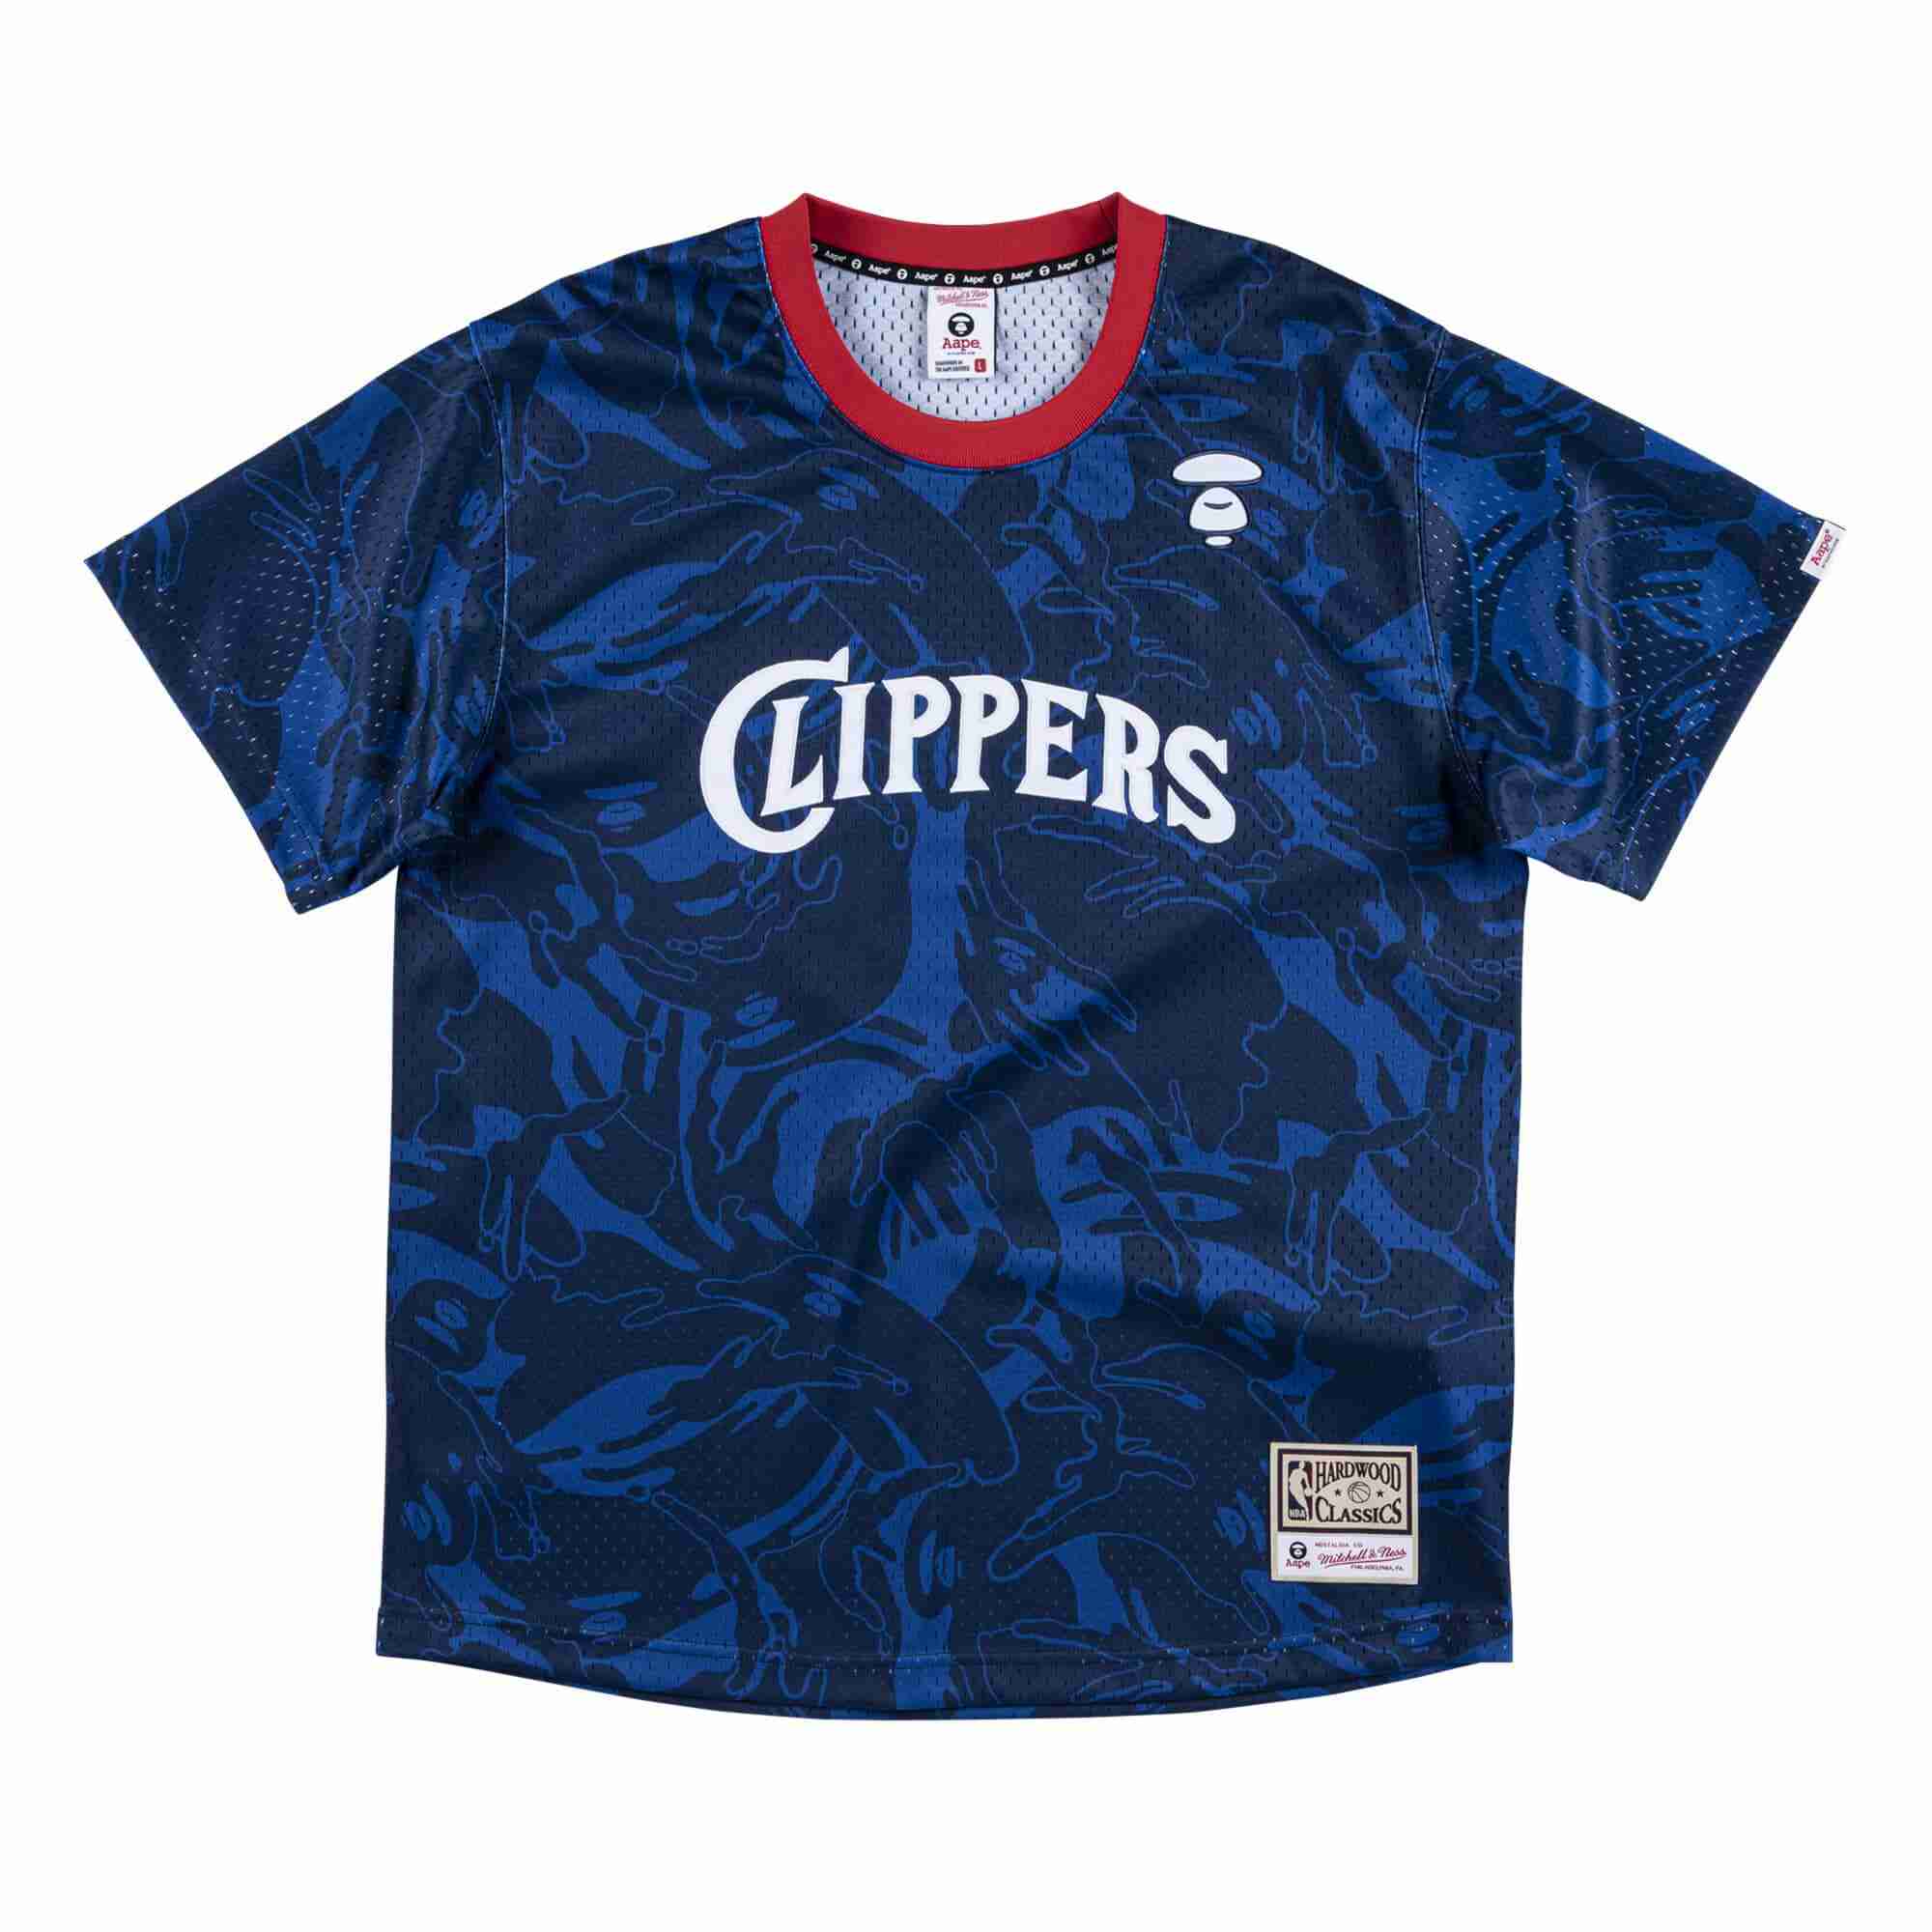 Aape x Mitchell Ness San Diego Clippers BP Jersey Navy